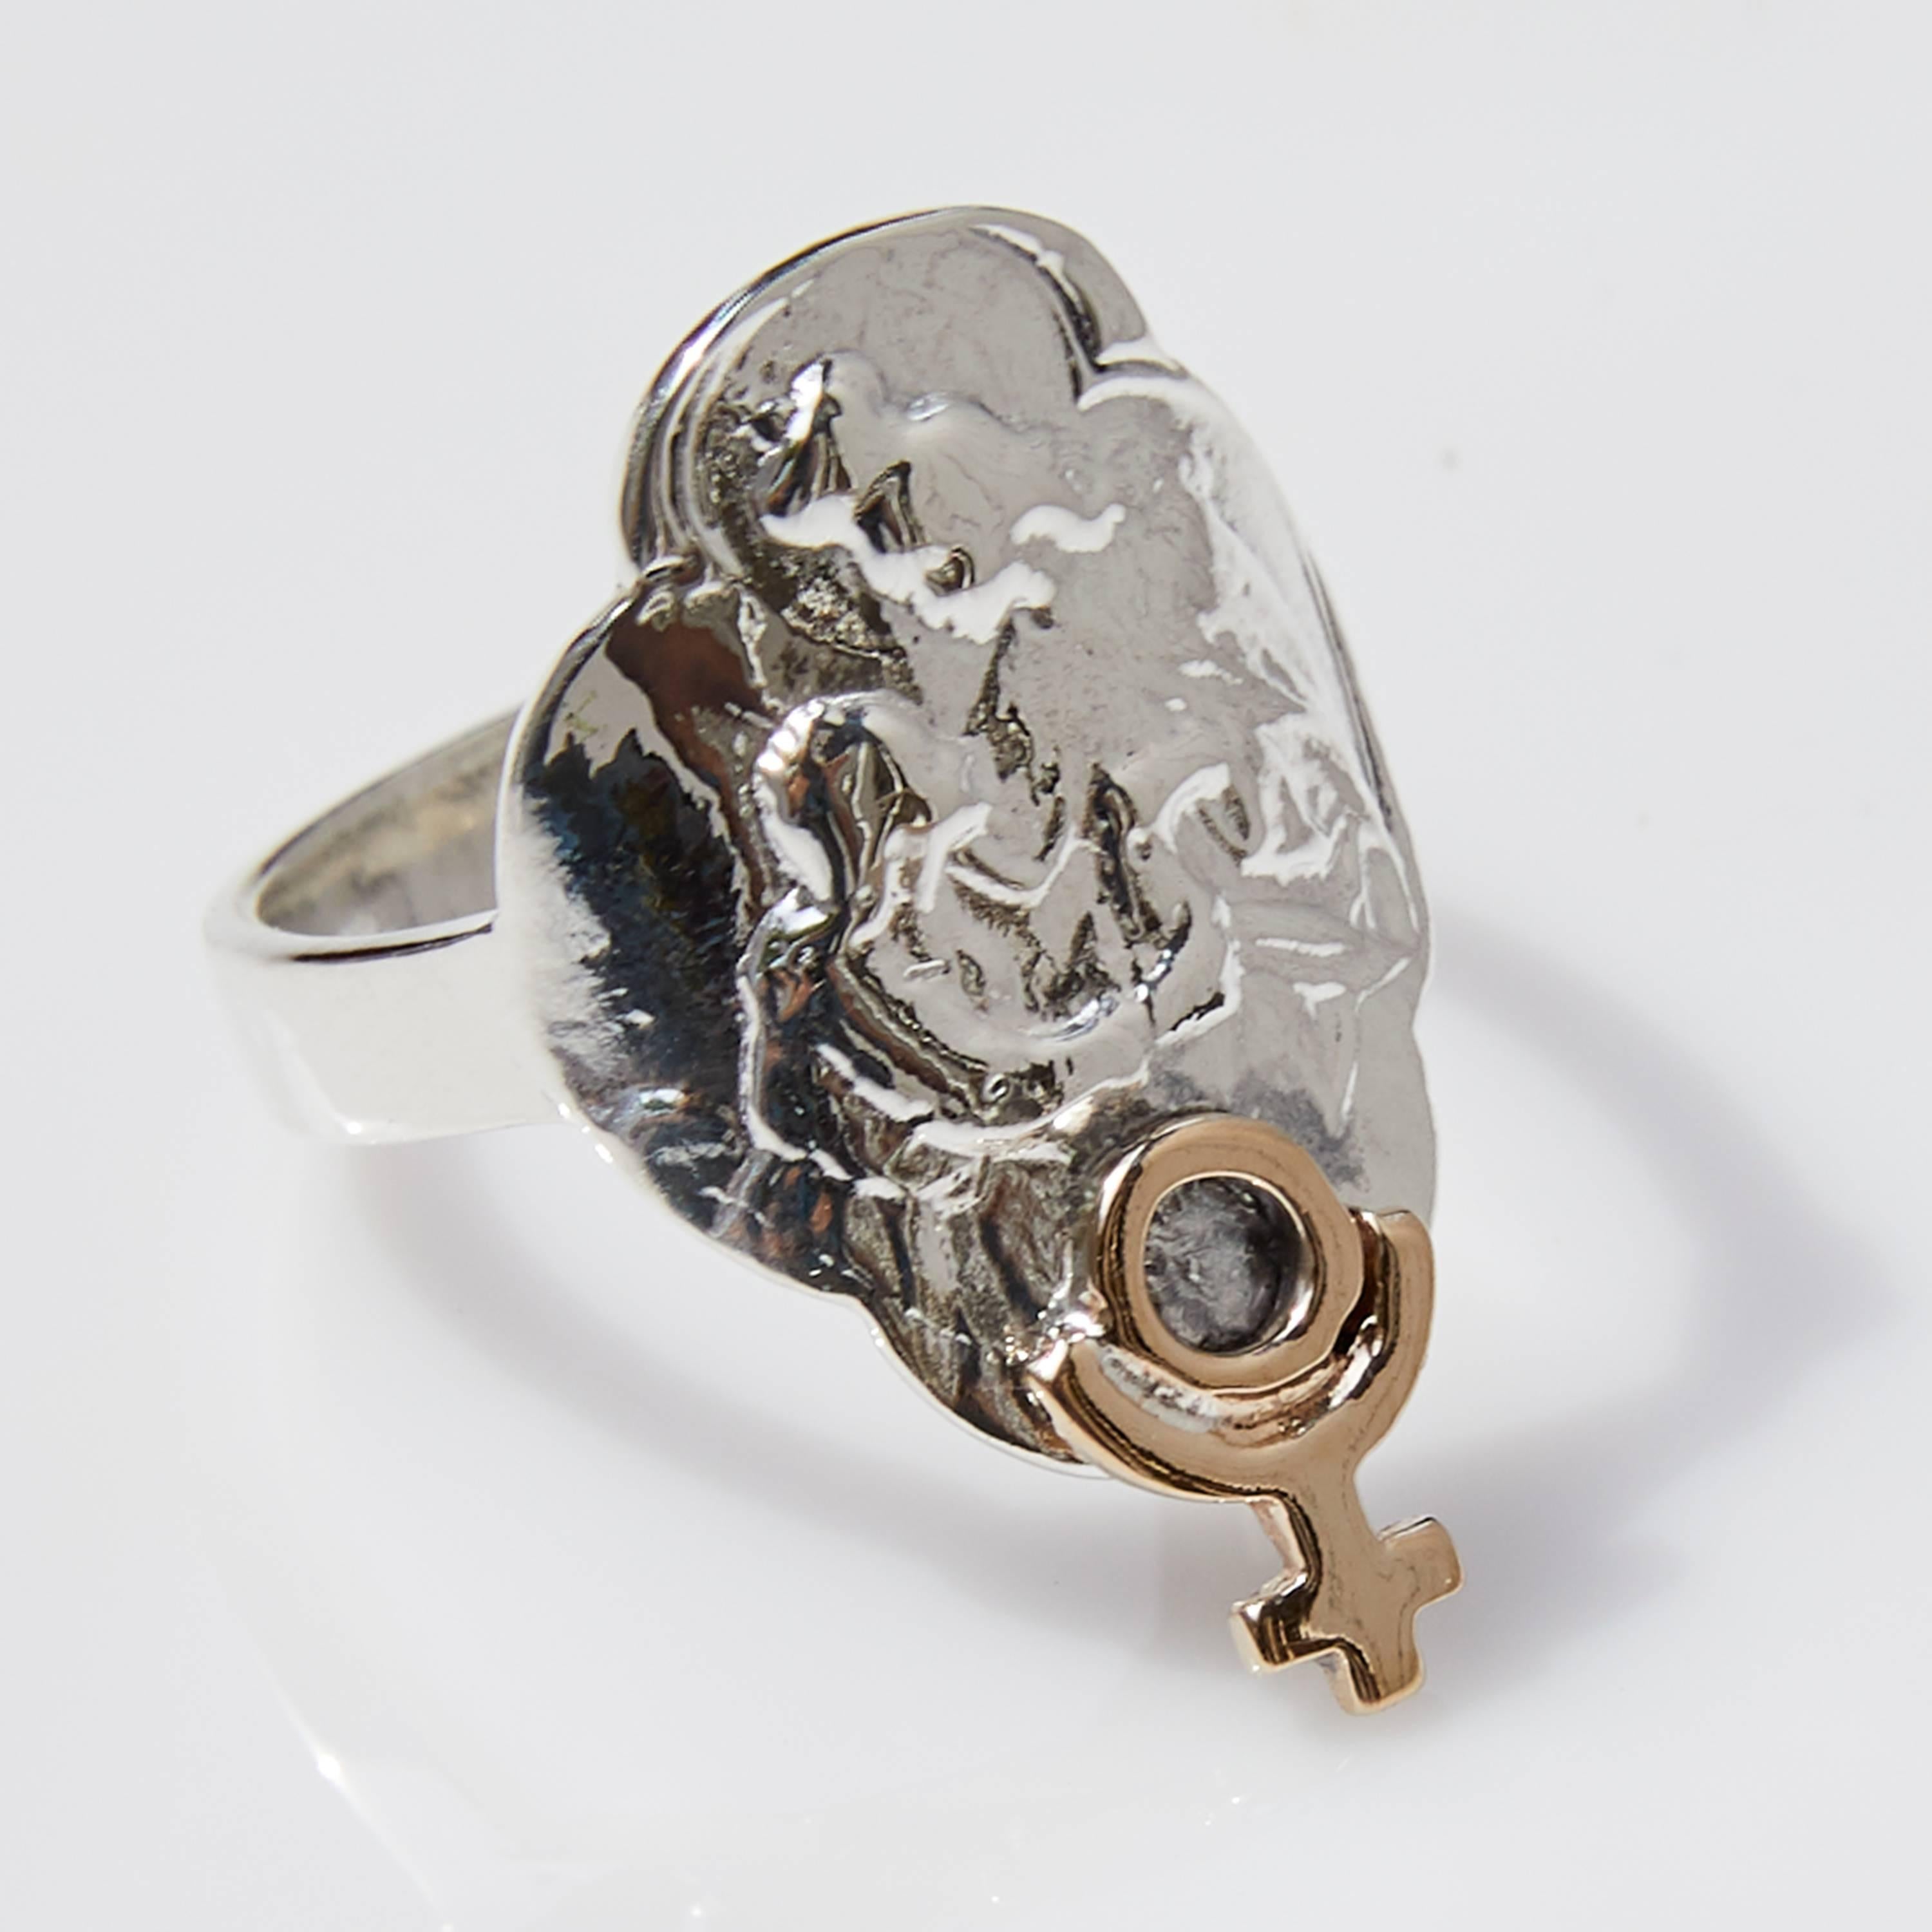 Virgin Mary Medal Ring Sterling Silver Gold Crest Pluto Astrology J Dauphin

J DAUPHIN 